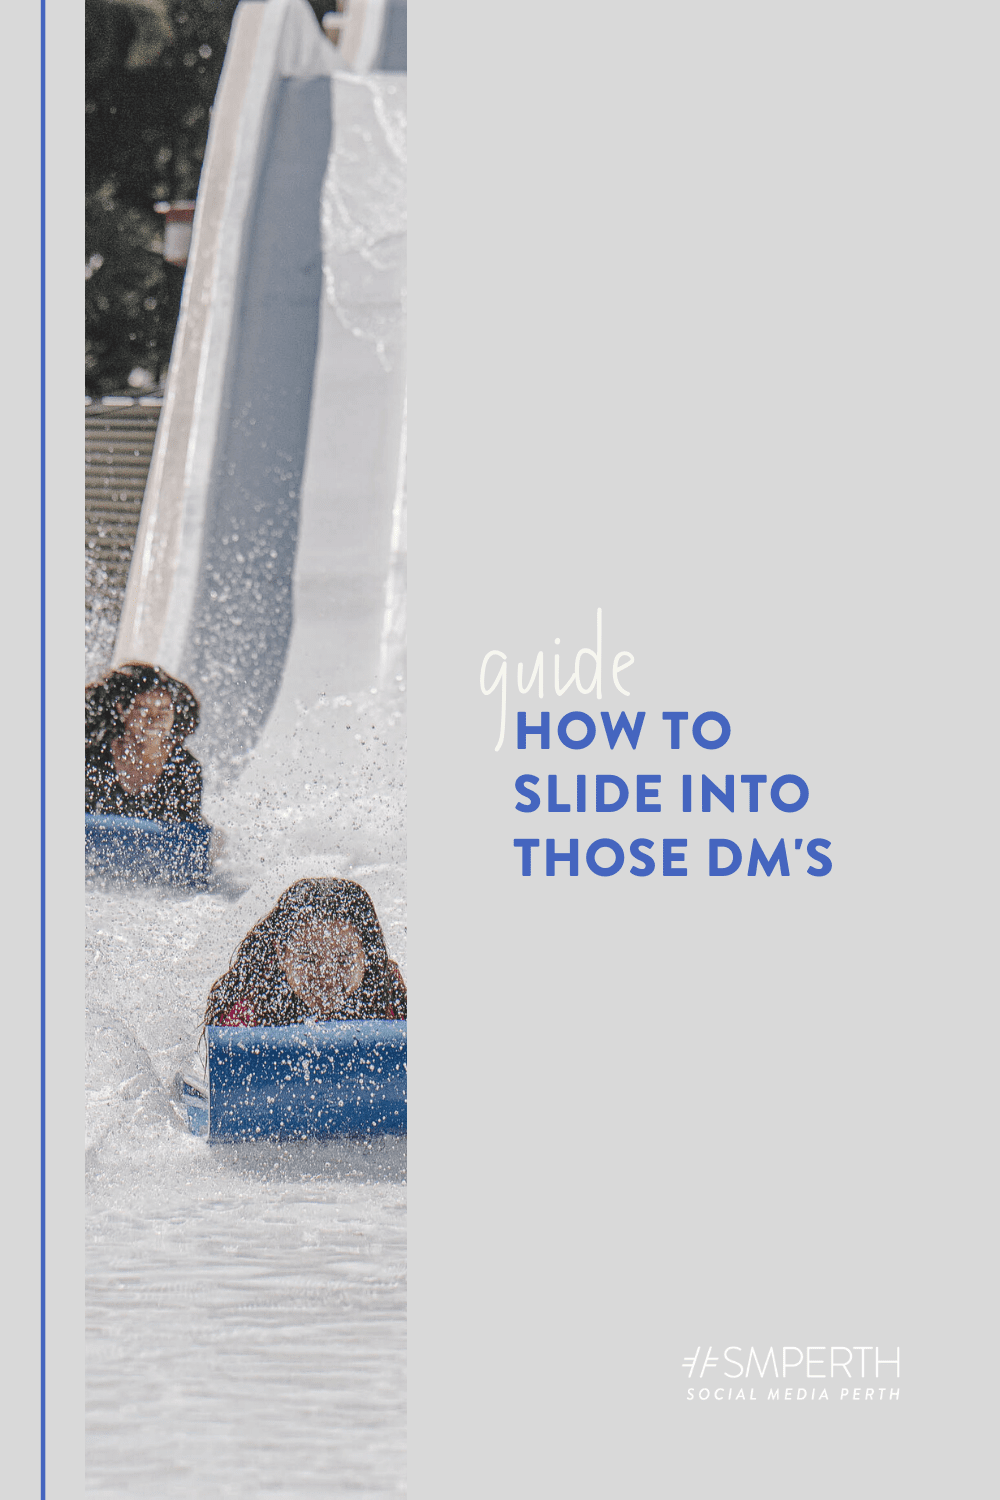 How to DM as part of your social media marketing strategy